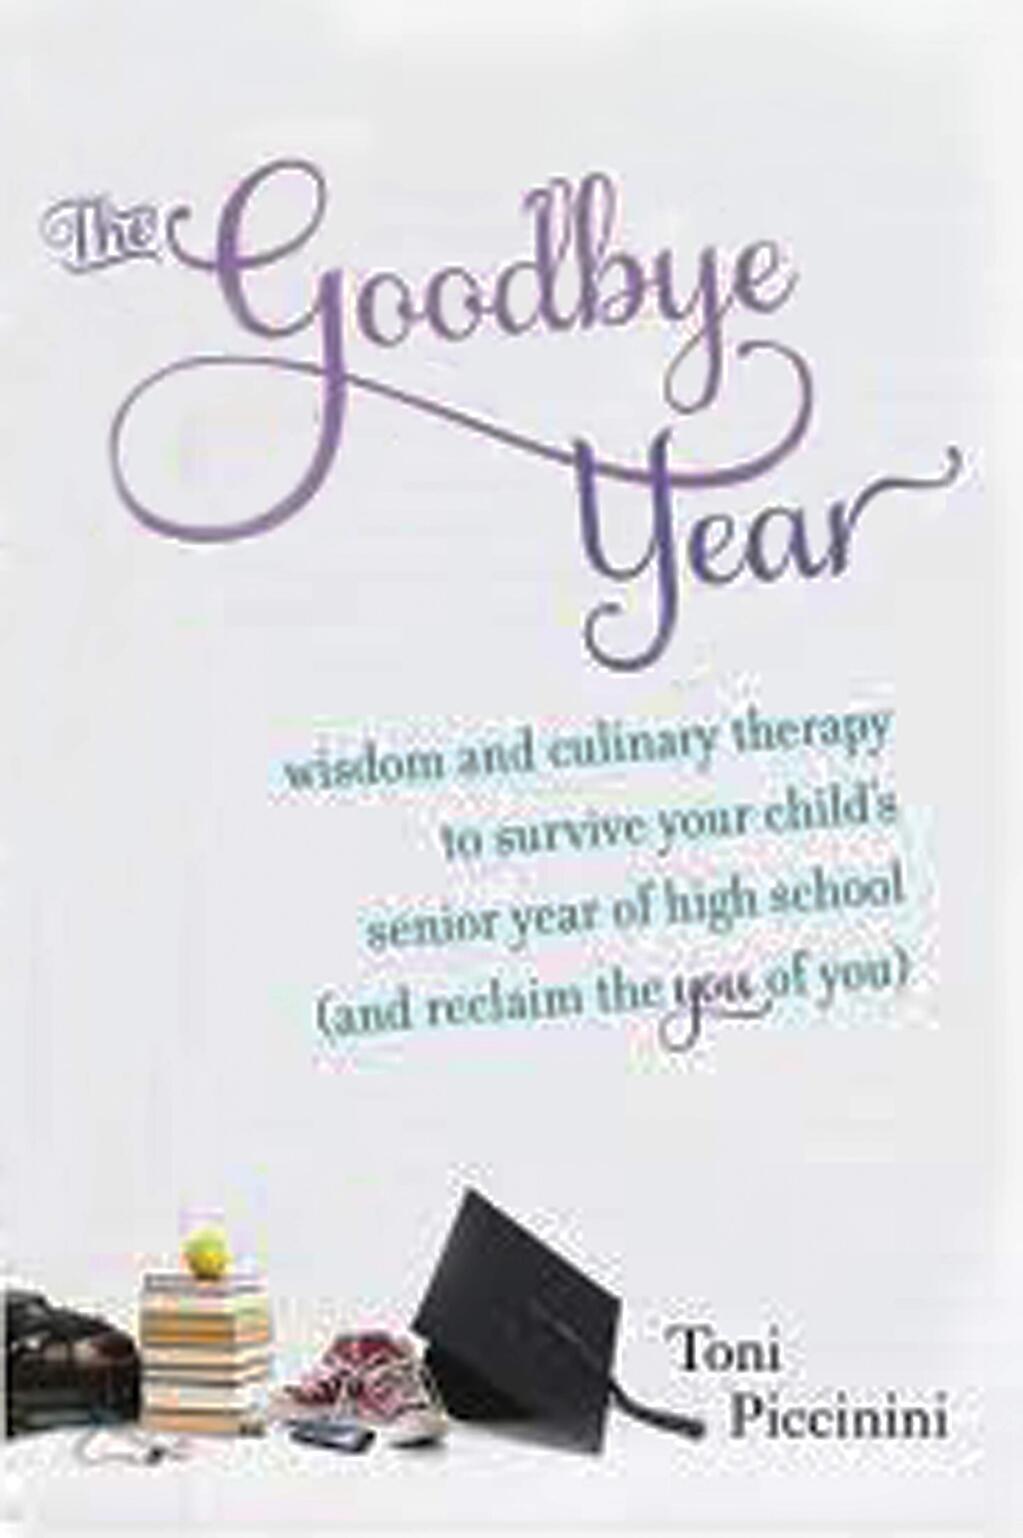 The Goodbye Year: Wisdom and Culinary Therapy to Survive Your Child's Senior Year of High School (and Reclaim the You of You) by Toni Piccinini.